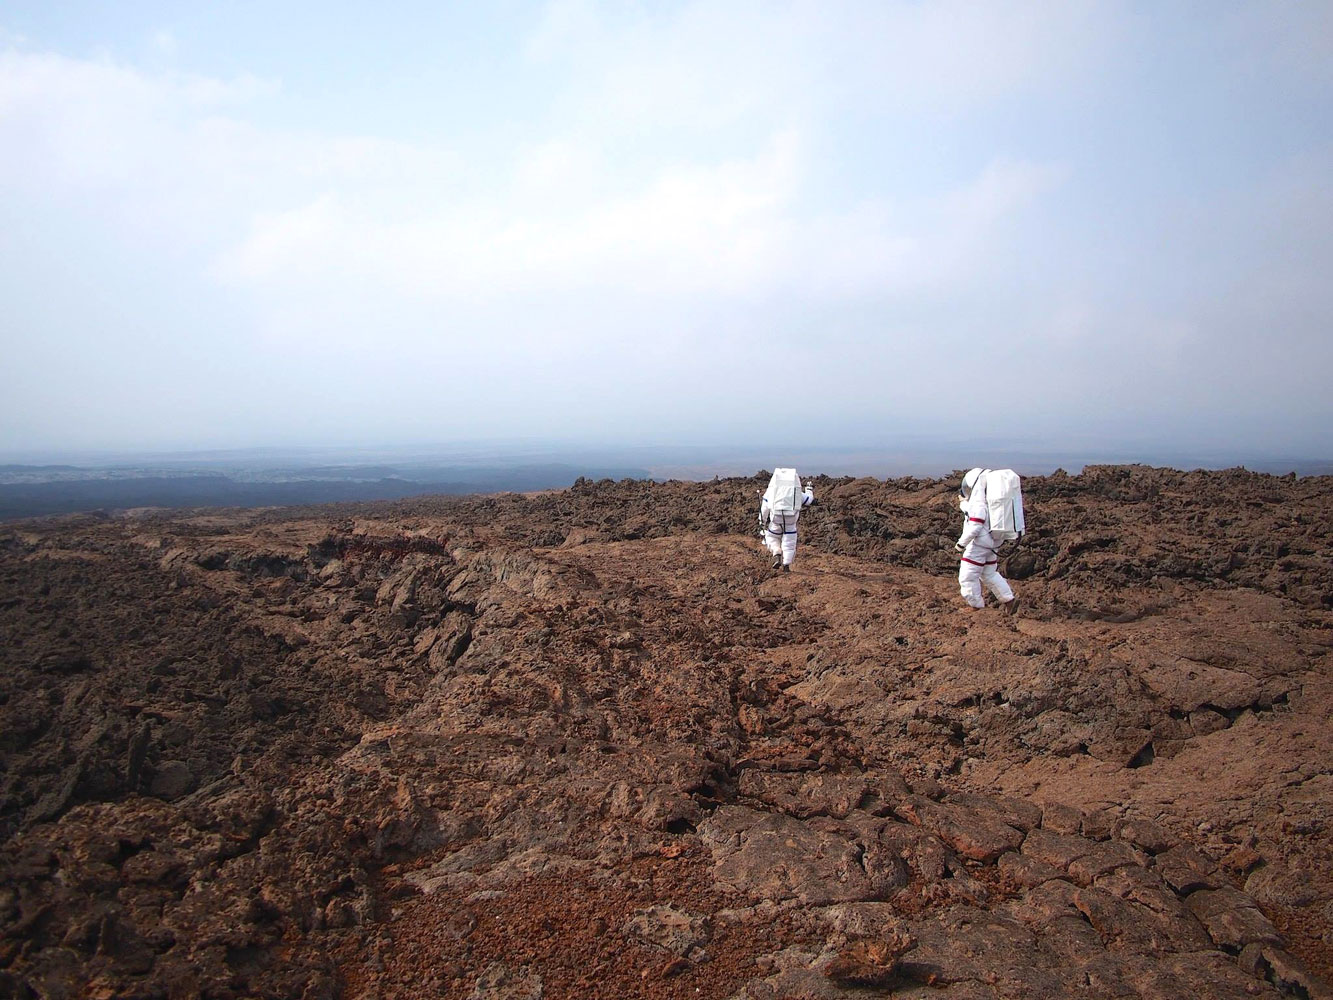 Scientist Lucie Poulet (right) from the DLR German Aerospace Center takes part in a simulated mission to Mars run by the University of Hawaii at Manoa in an image released on May 14, 2014.